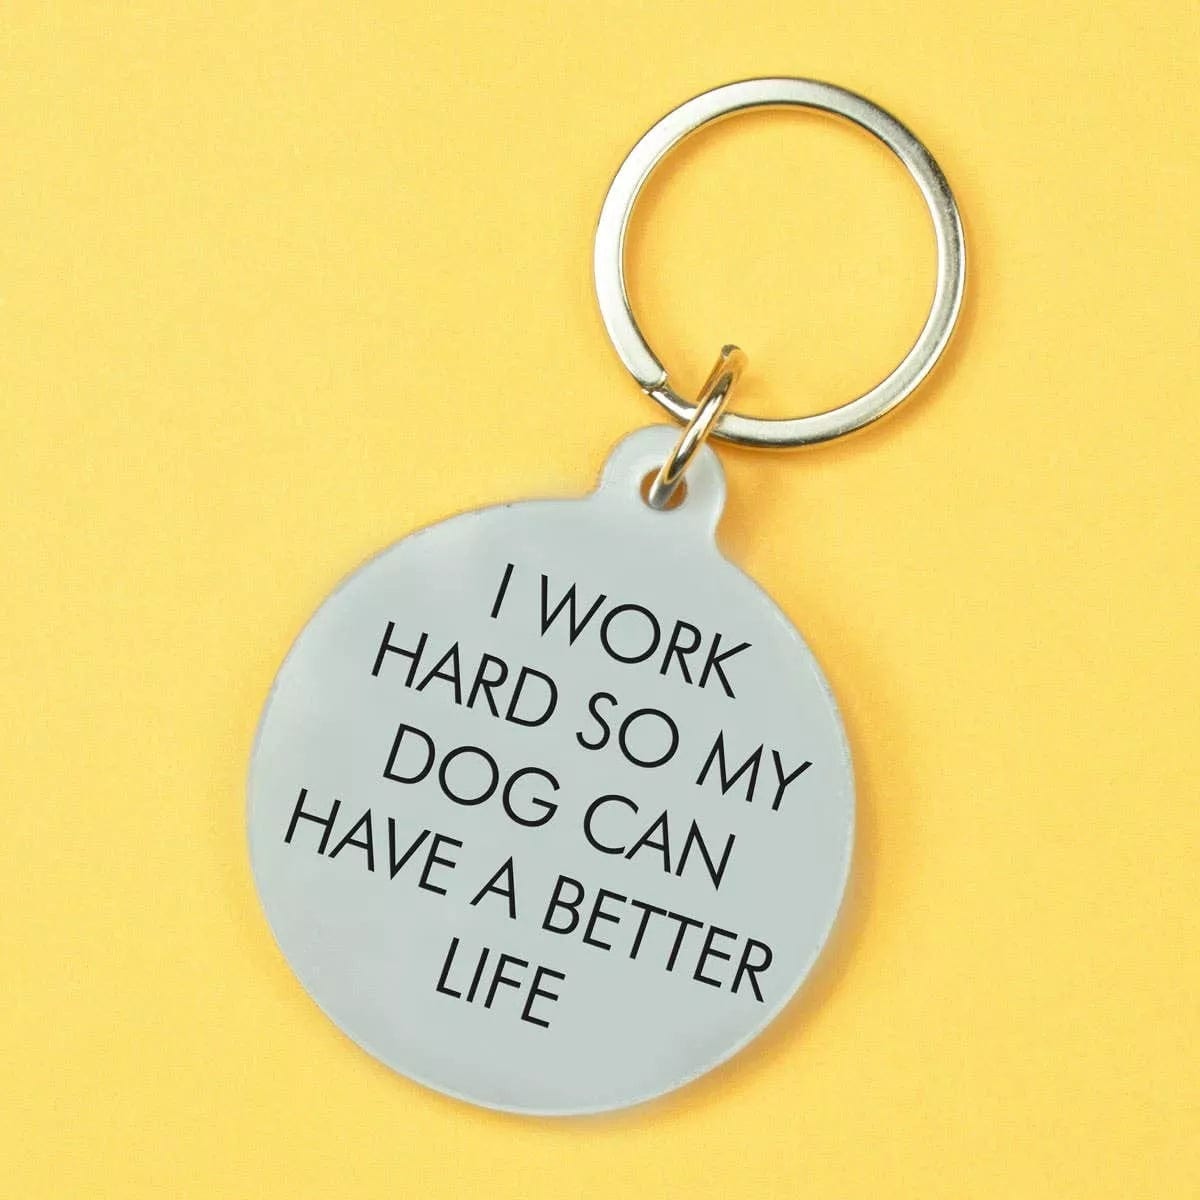 Flamingo Candles 'I Work Hard So My Dog Can Have a Better Life' Keyring